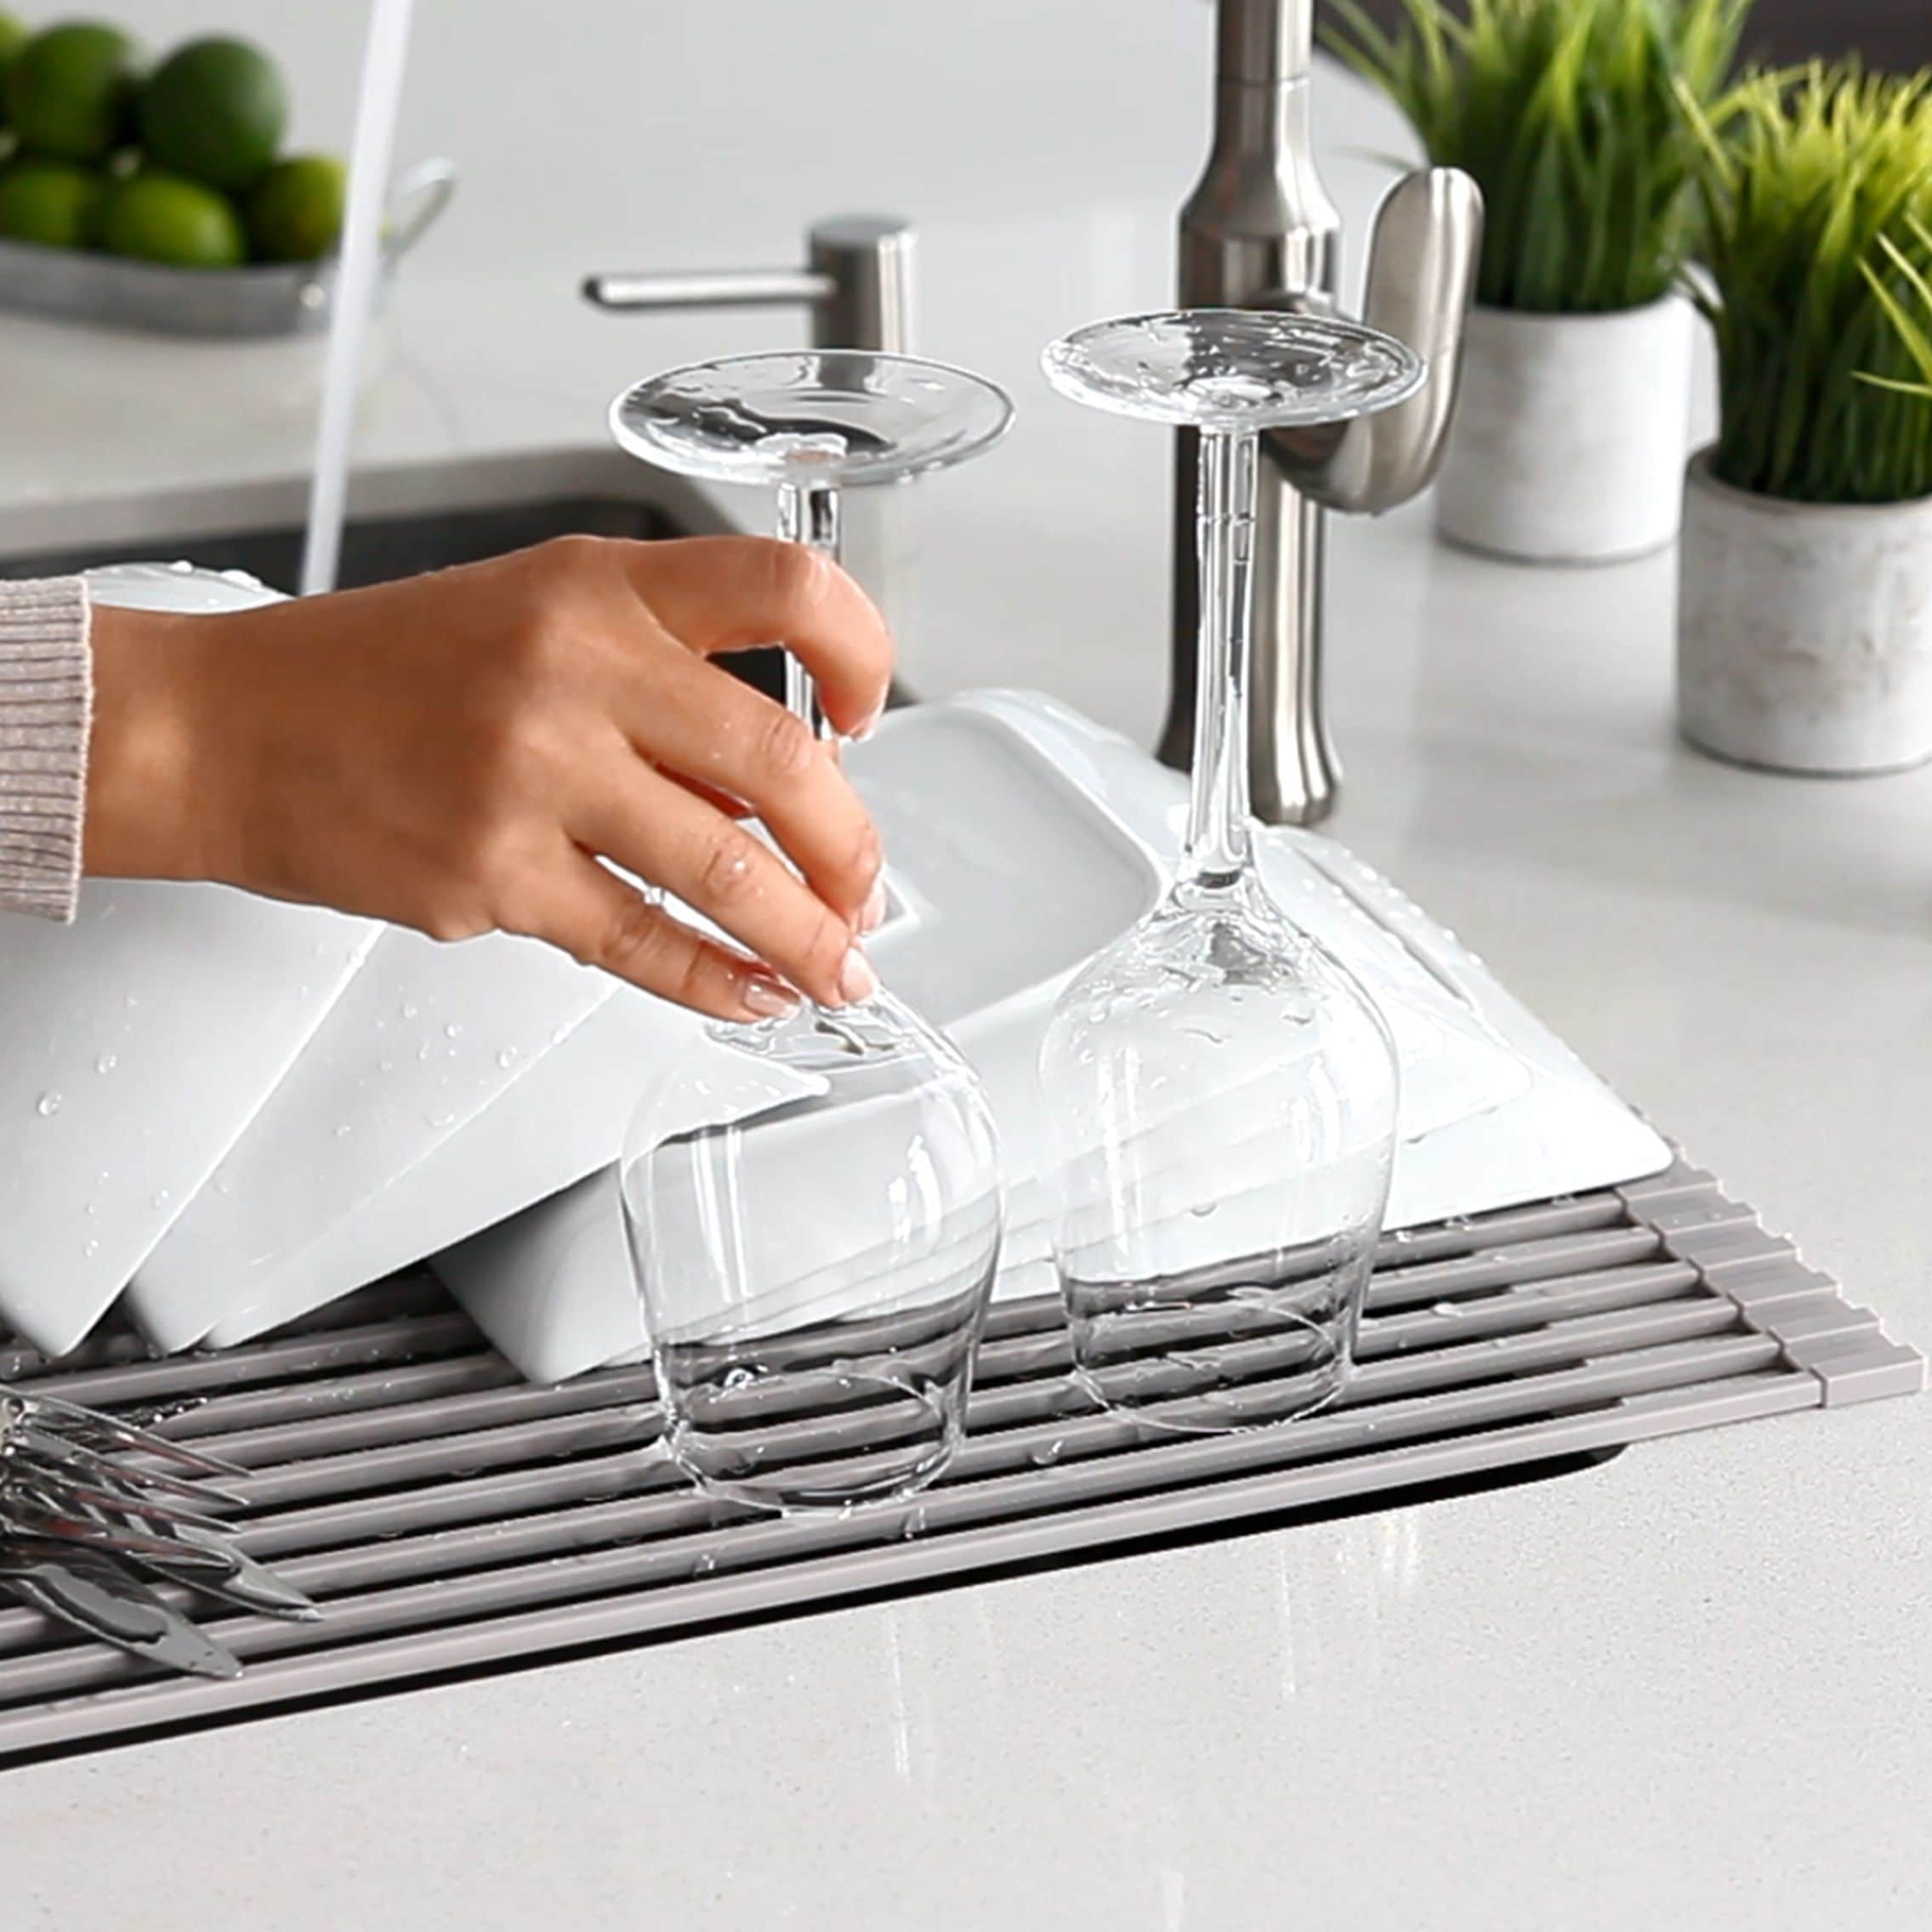 EMBATHER 20.8'' x 18.1'' Roll Up Dish Drying Rack Over The Sink